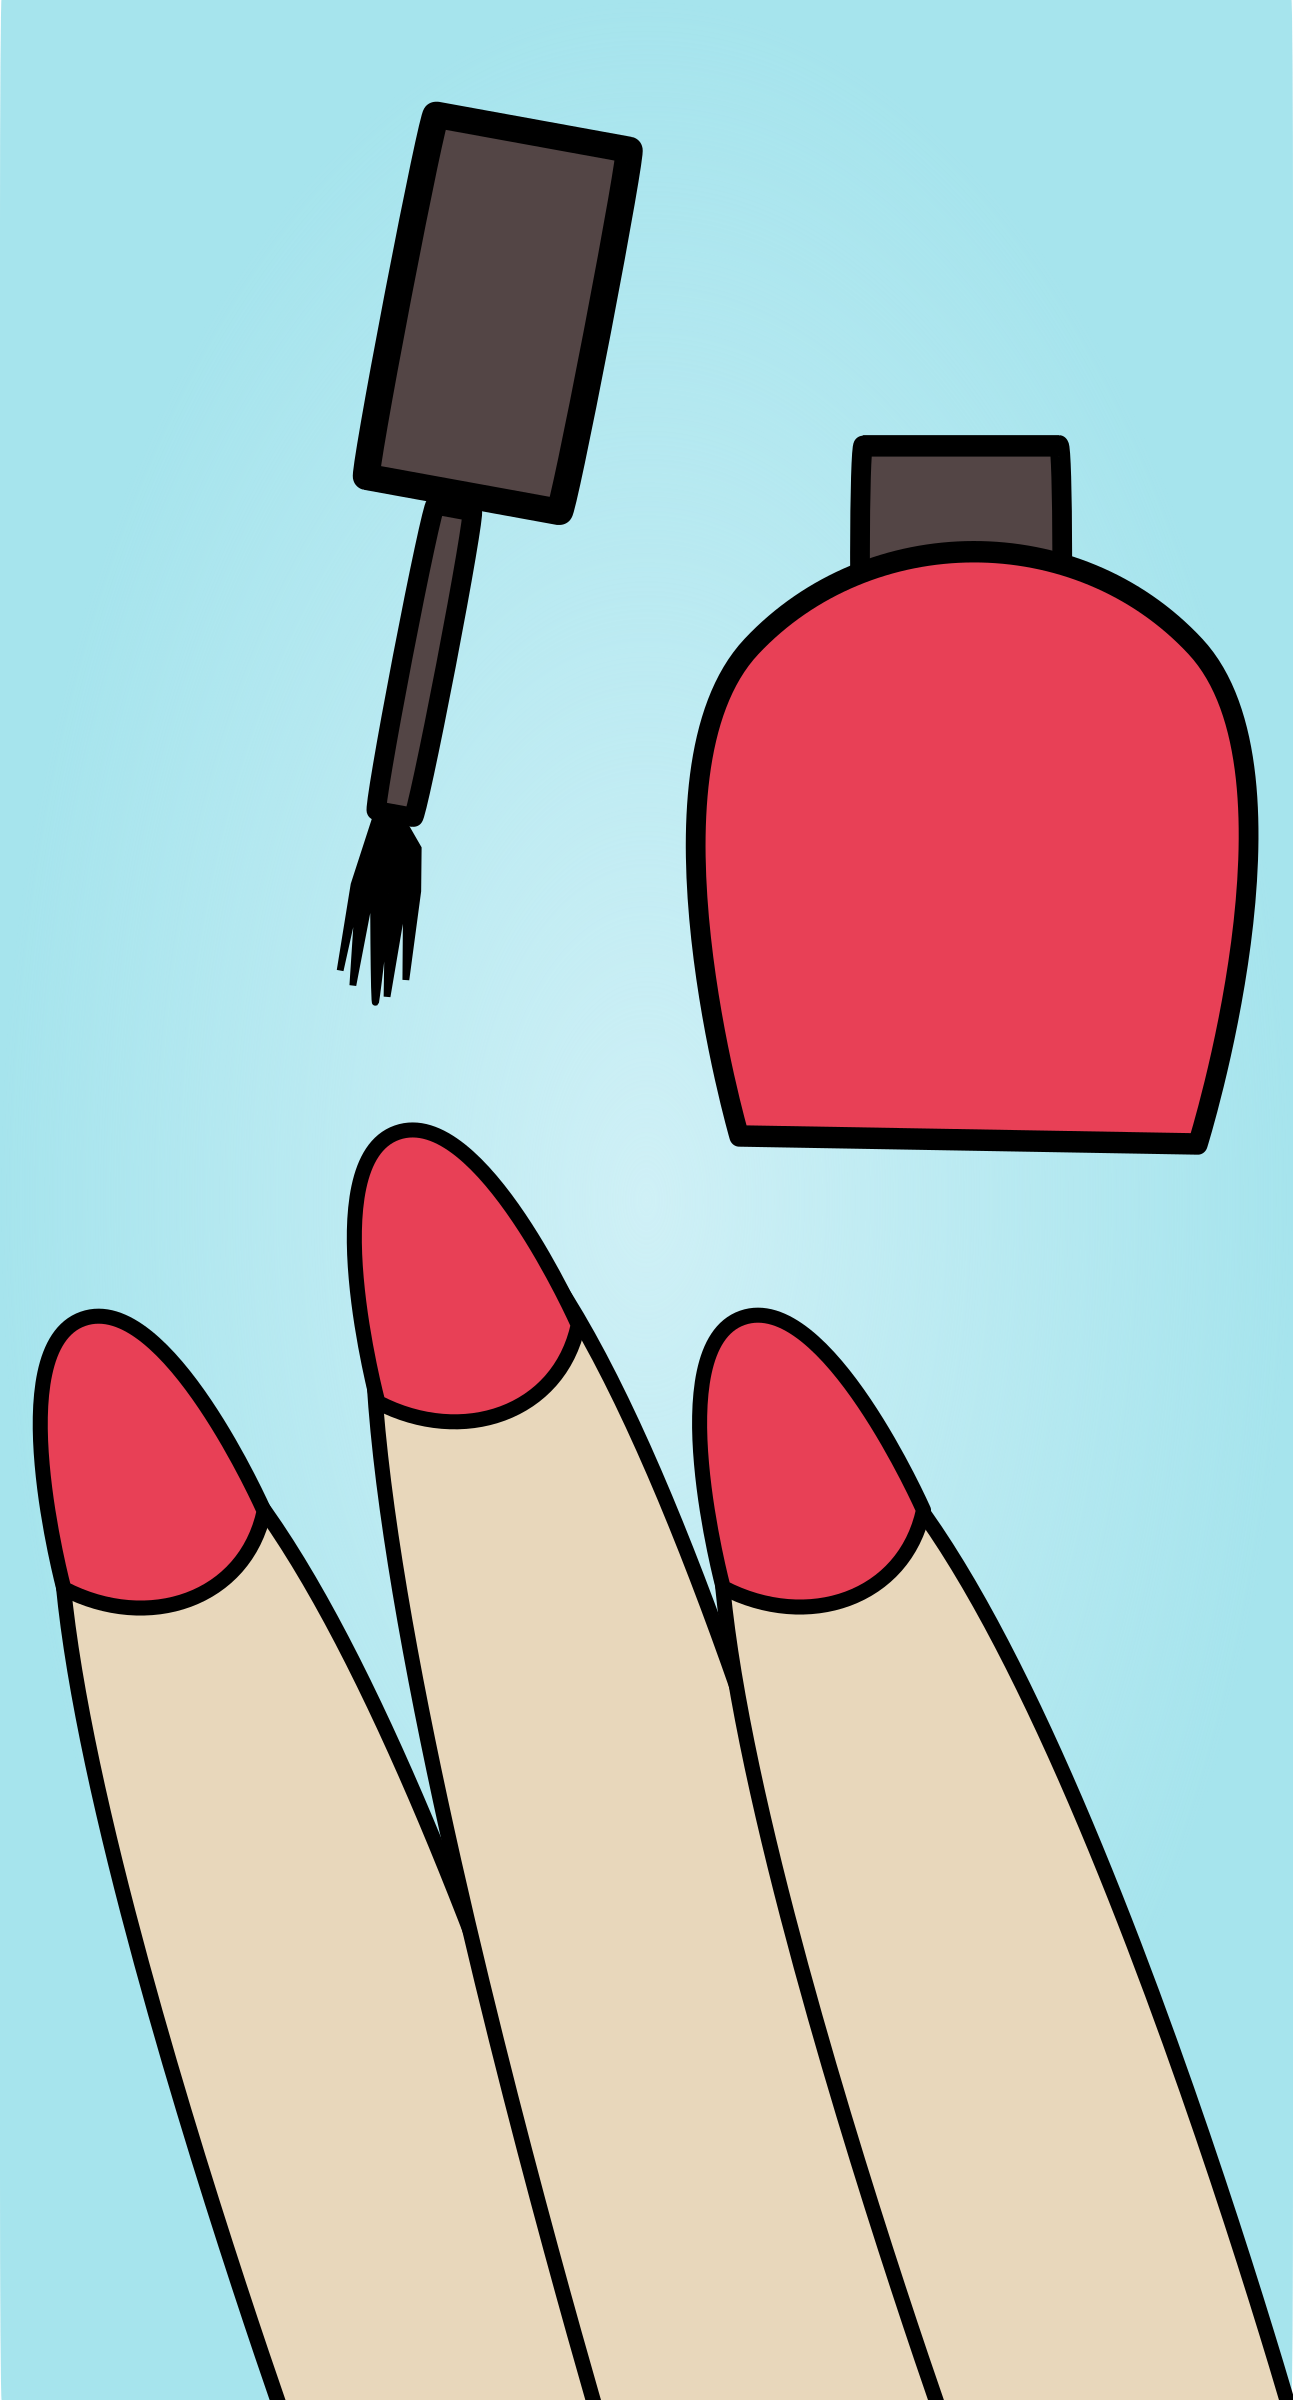 Free download best on. Nails clipart polished nail